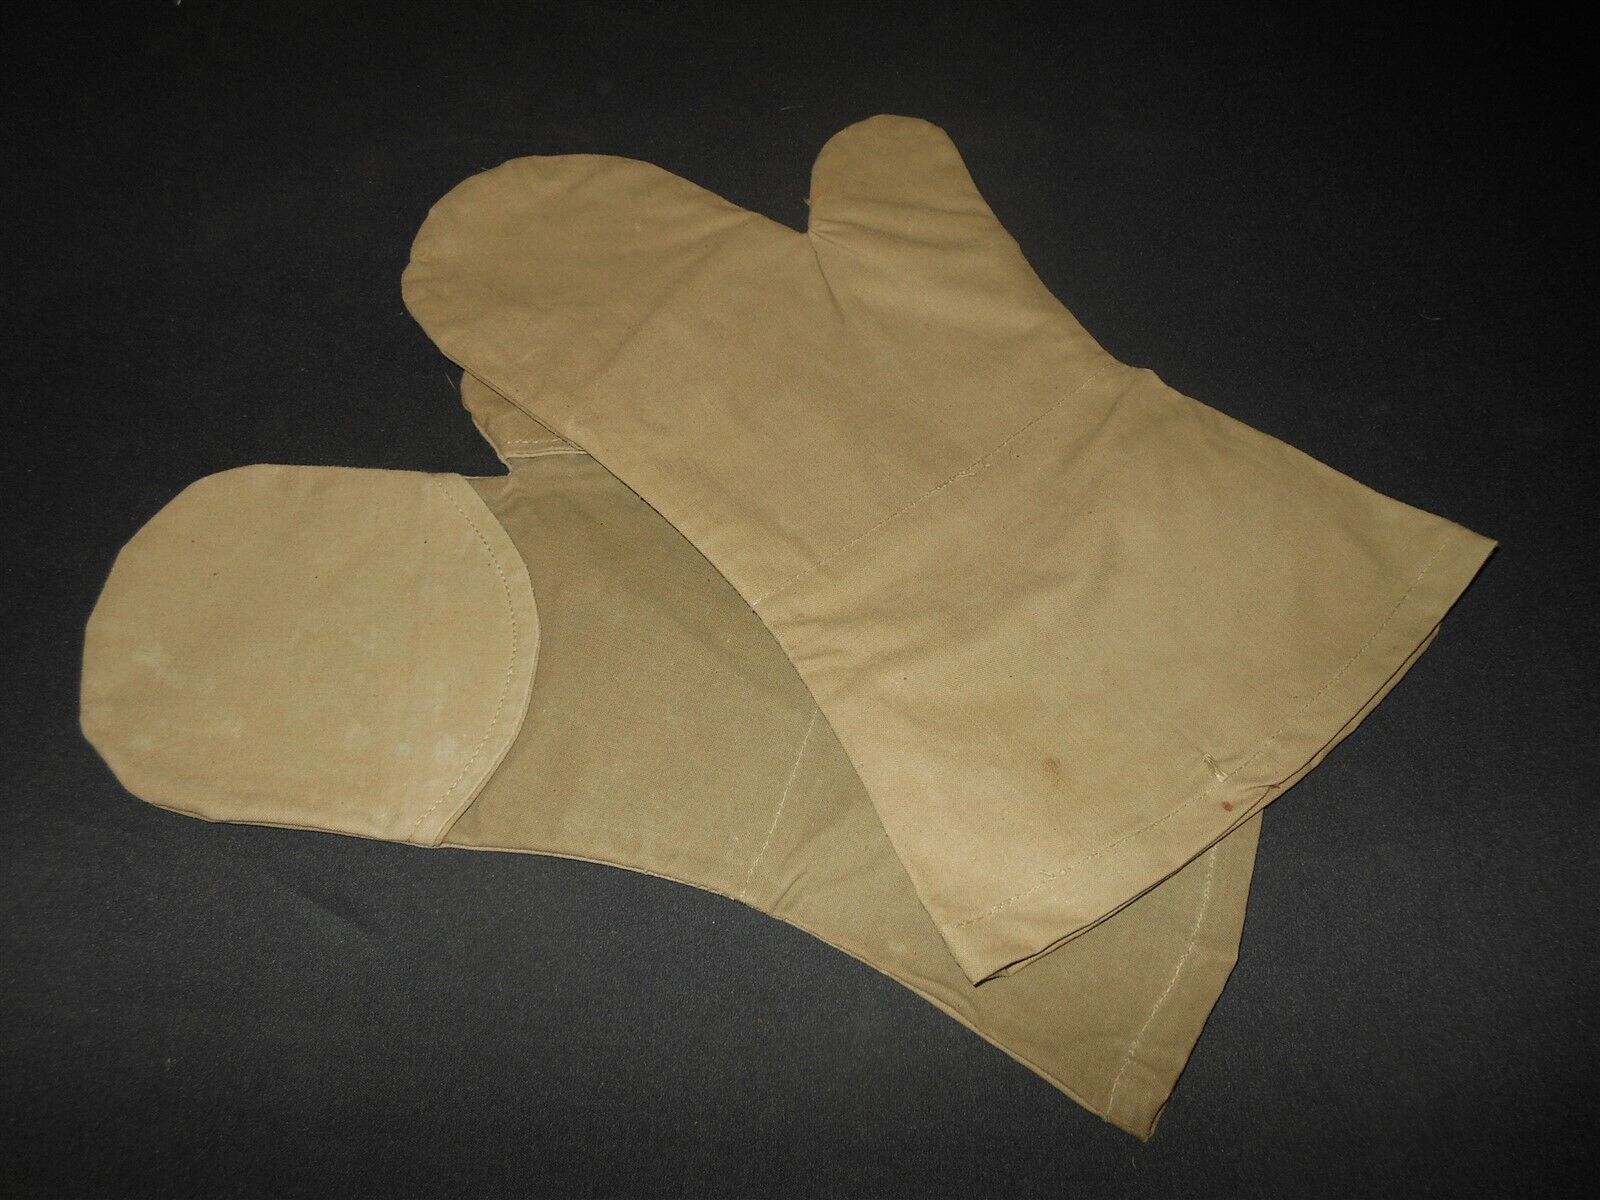 https://axis-militaria.com/wp-content/uploads/imported/5/WW-II-Imperial-Japanese-Army-MOSQUITO-PROOF-GLOVES-MITTENS-SUPERB-235221995785.jpg